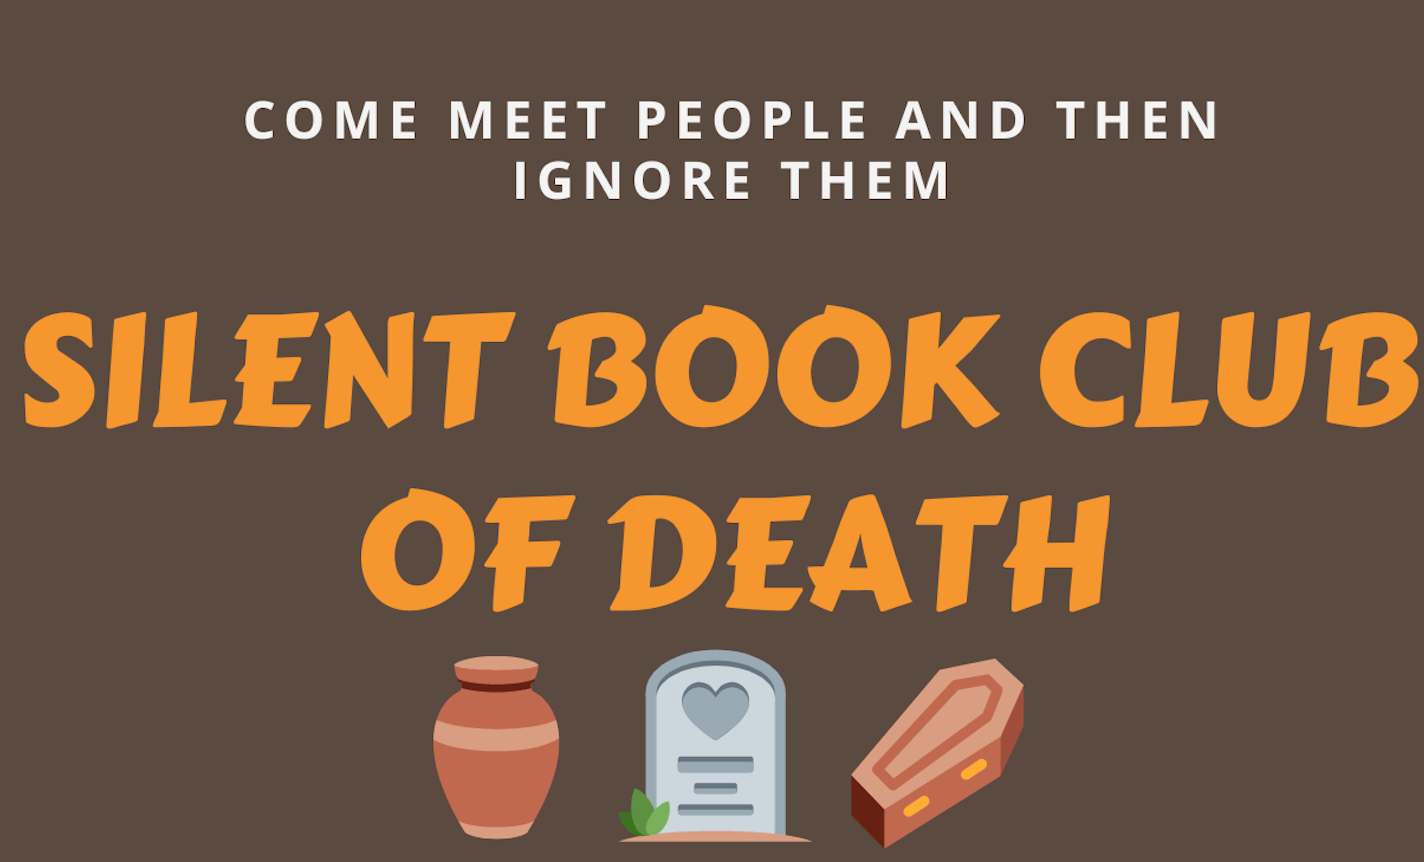 Silent Book Club of Death - January